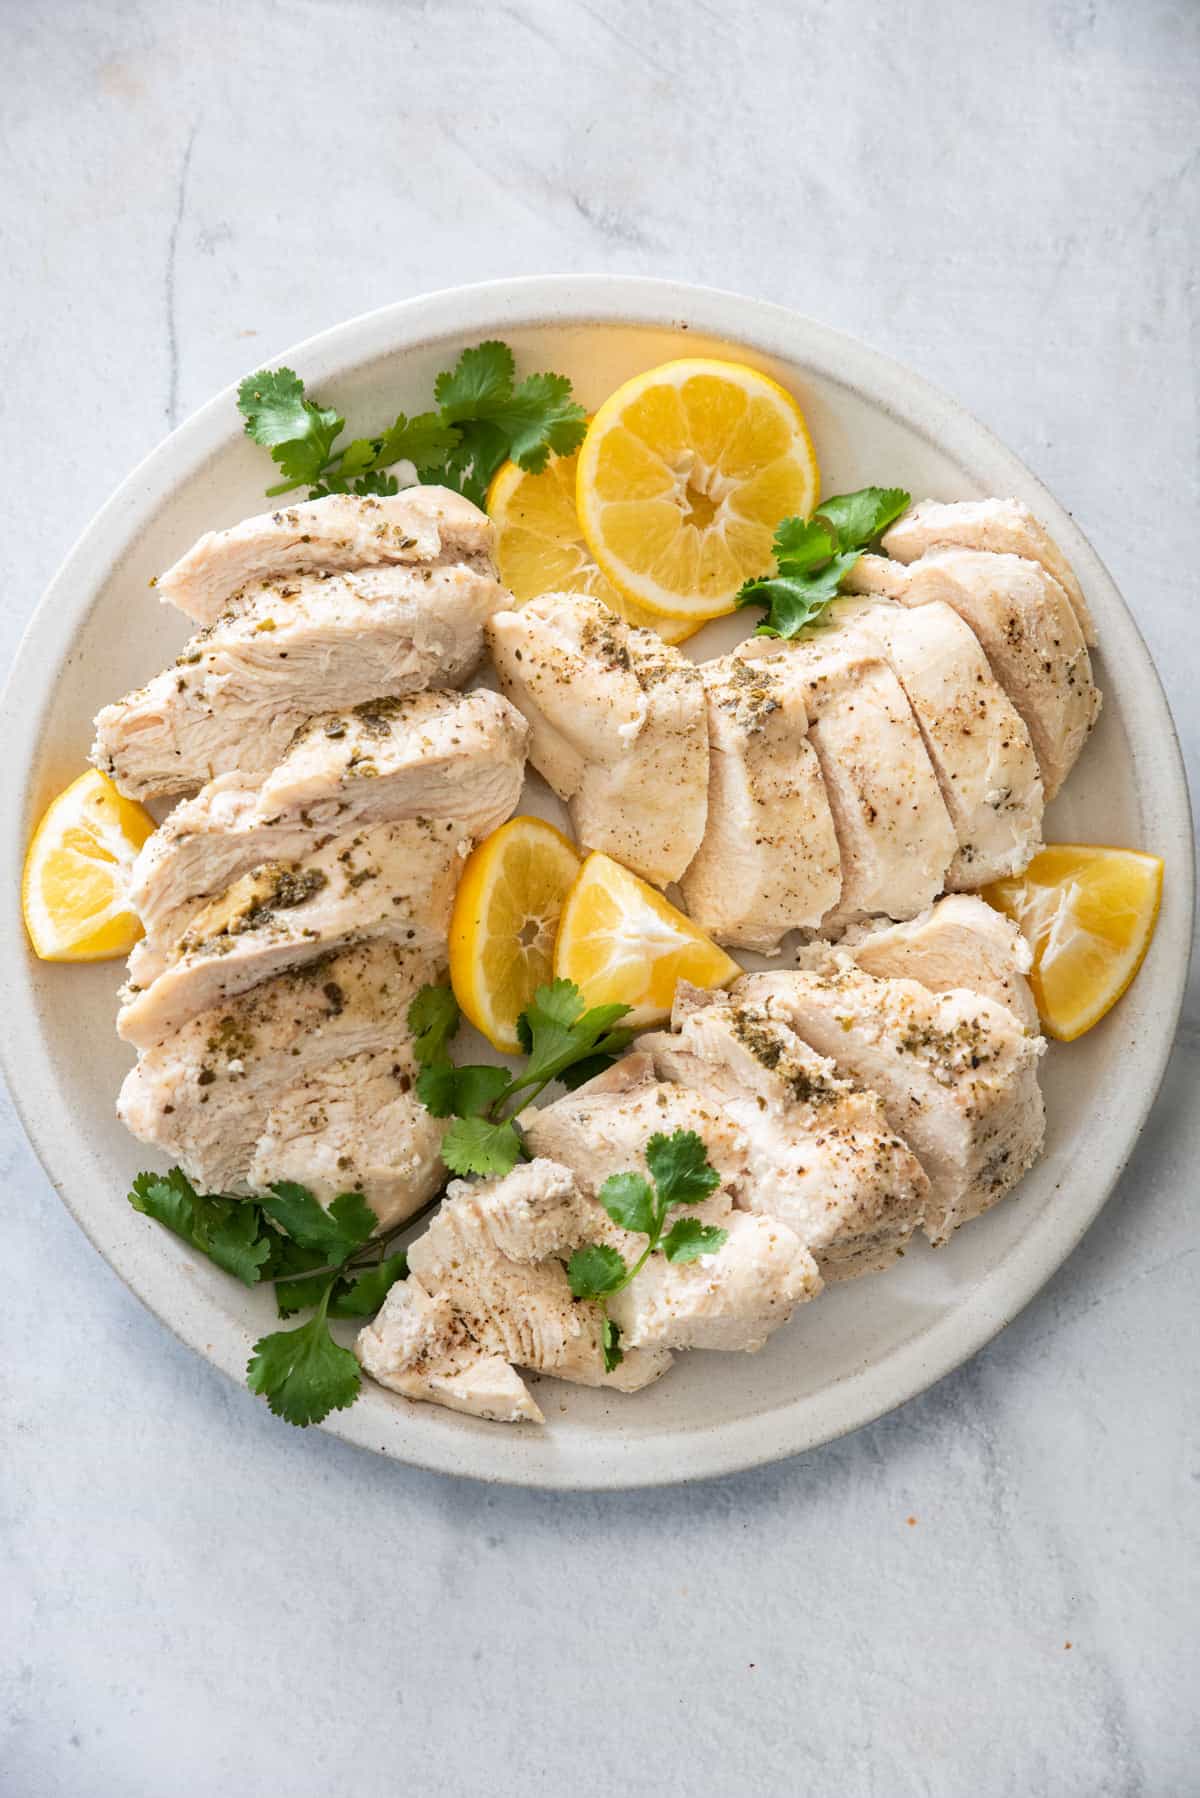 Plate of cooked chicken breast that was cooked in instant pot